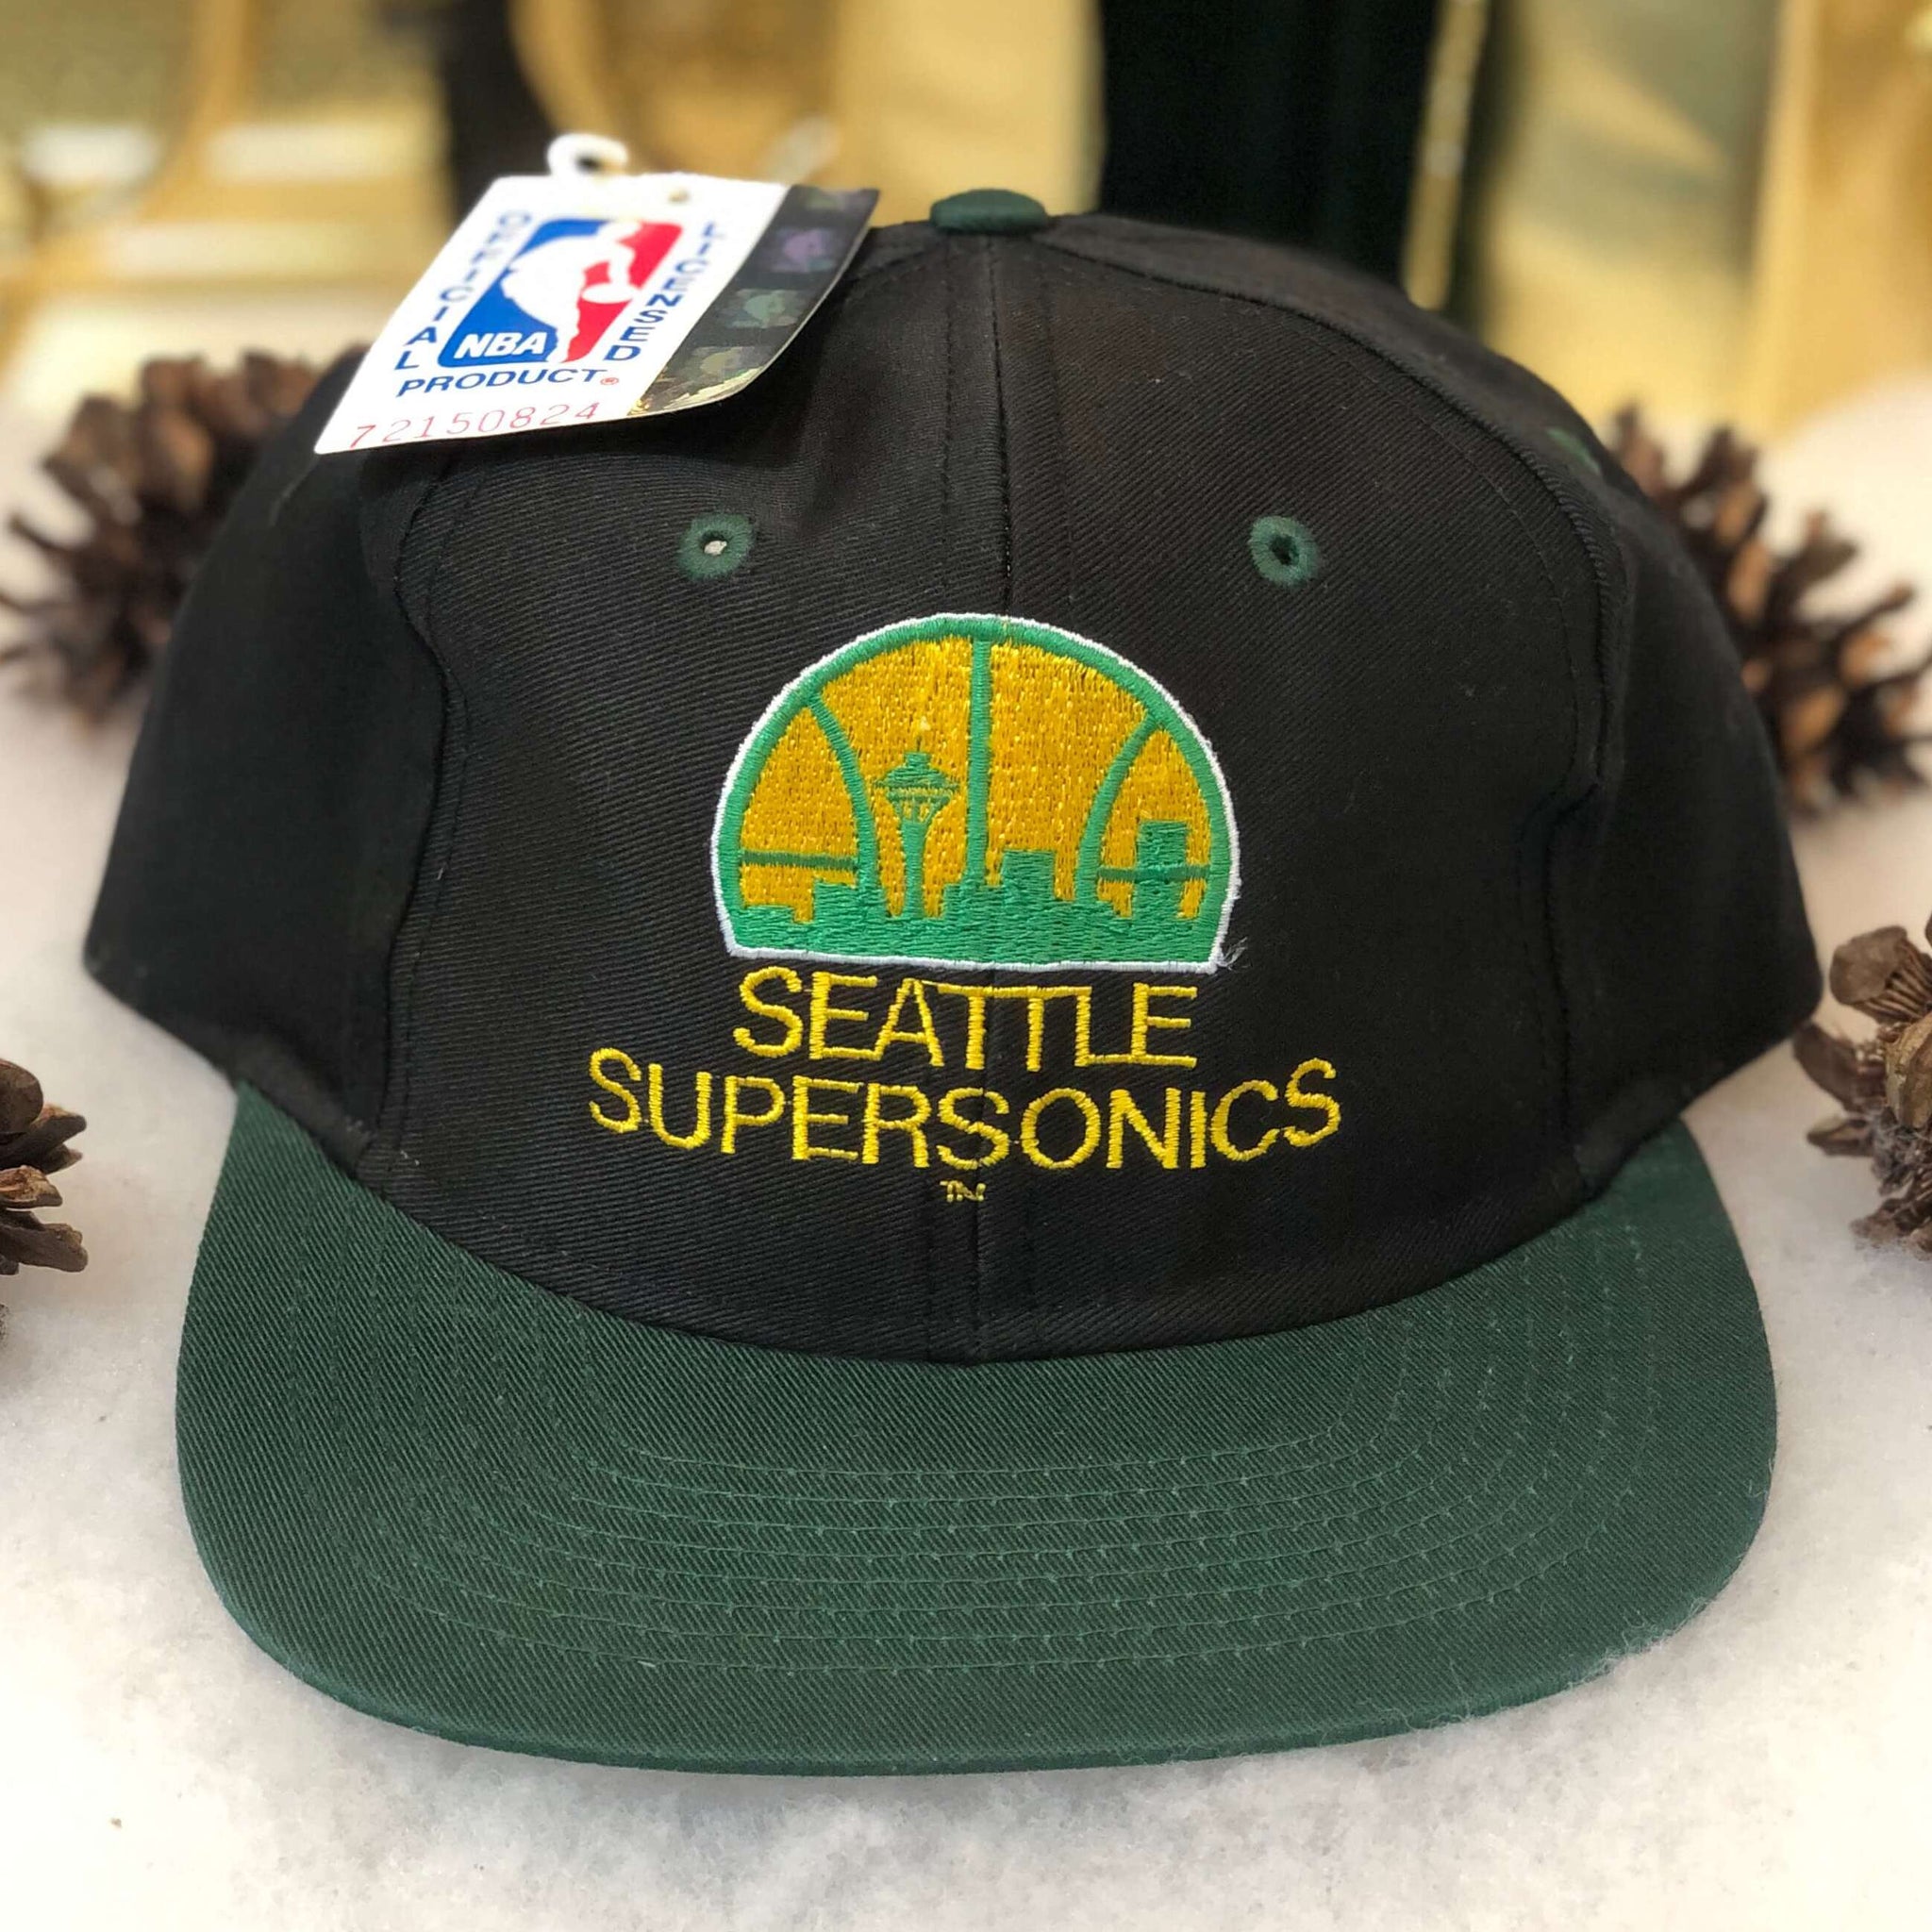 Vintage Deadstock NWT NBA Seattle Supersonics Competitor Twill Snapback Hat